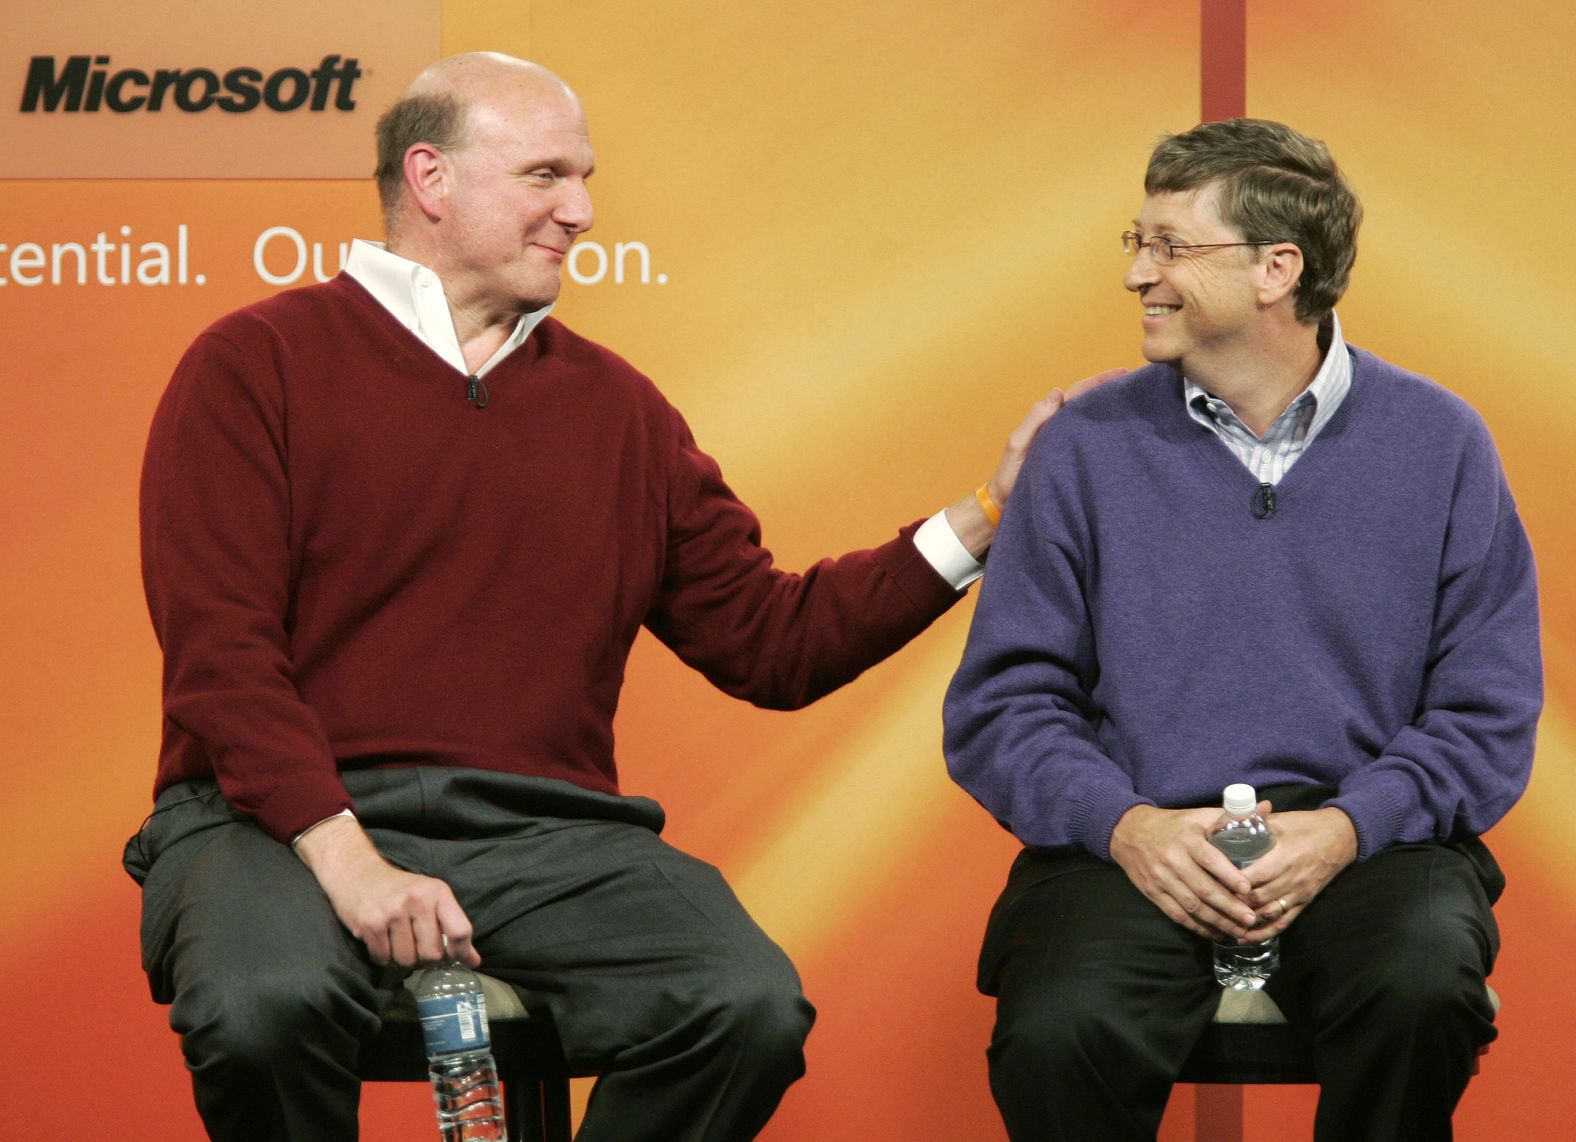 Gates, seen here with Microsoft CEO Steve Ballmer, announced in 2006 that he would be giving up his daily role at Microsoft, effective July 2008, to concentrate on his humanitarian and educational interests.